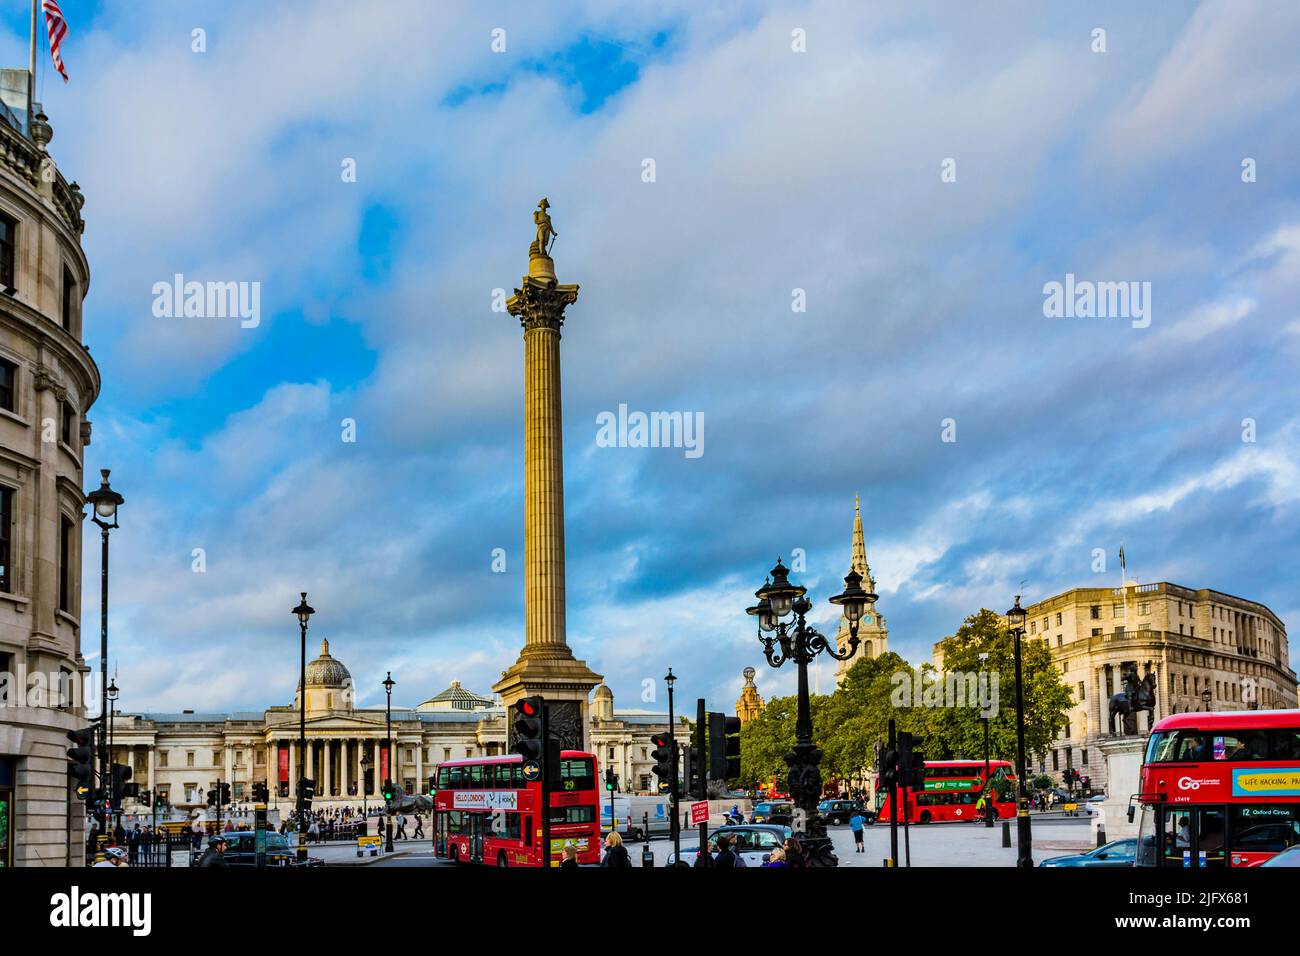 Nelson's Column. Trafalgar Square is a public square in the City of Westminster, Central London, established in the early 19th century around the area Stock Photo